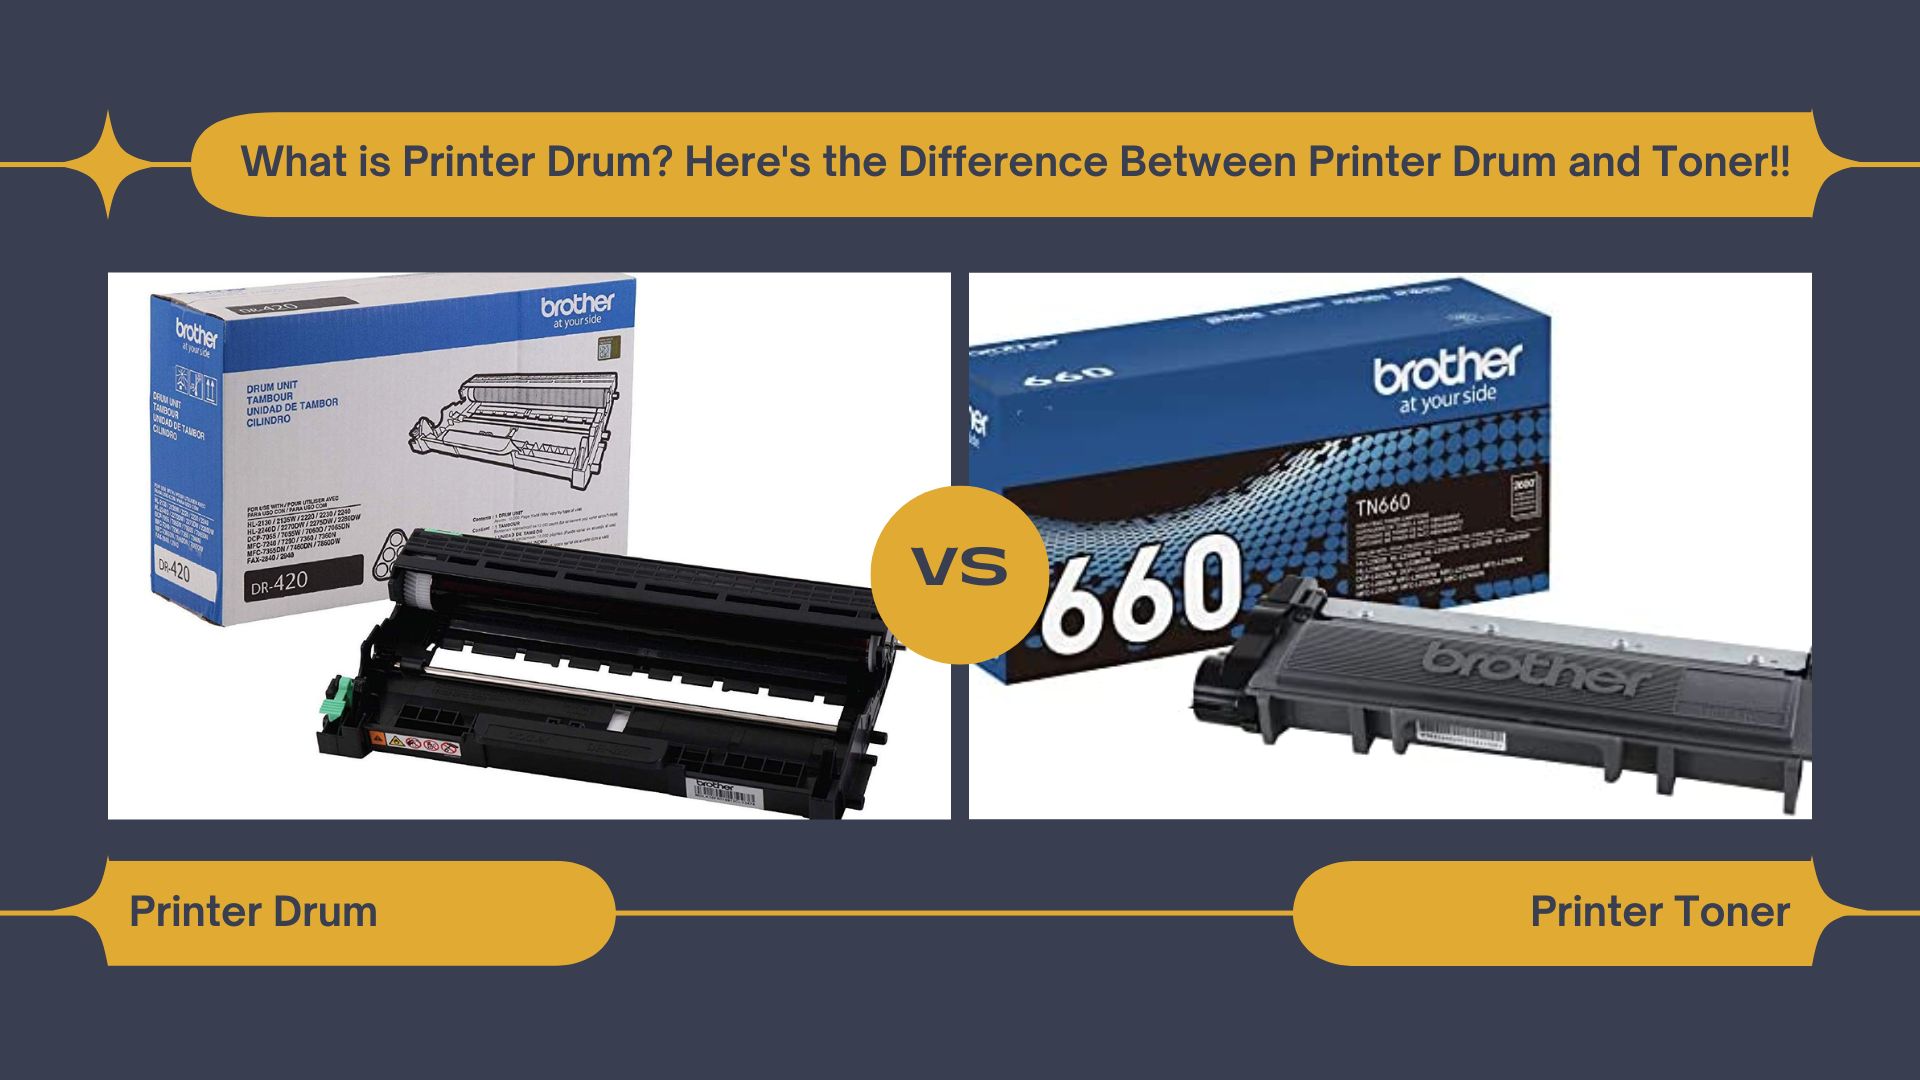 Differences Between a Printer Drum and Toner